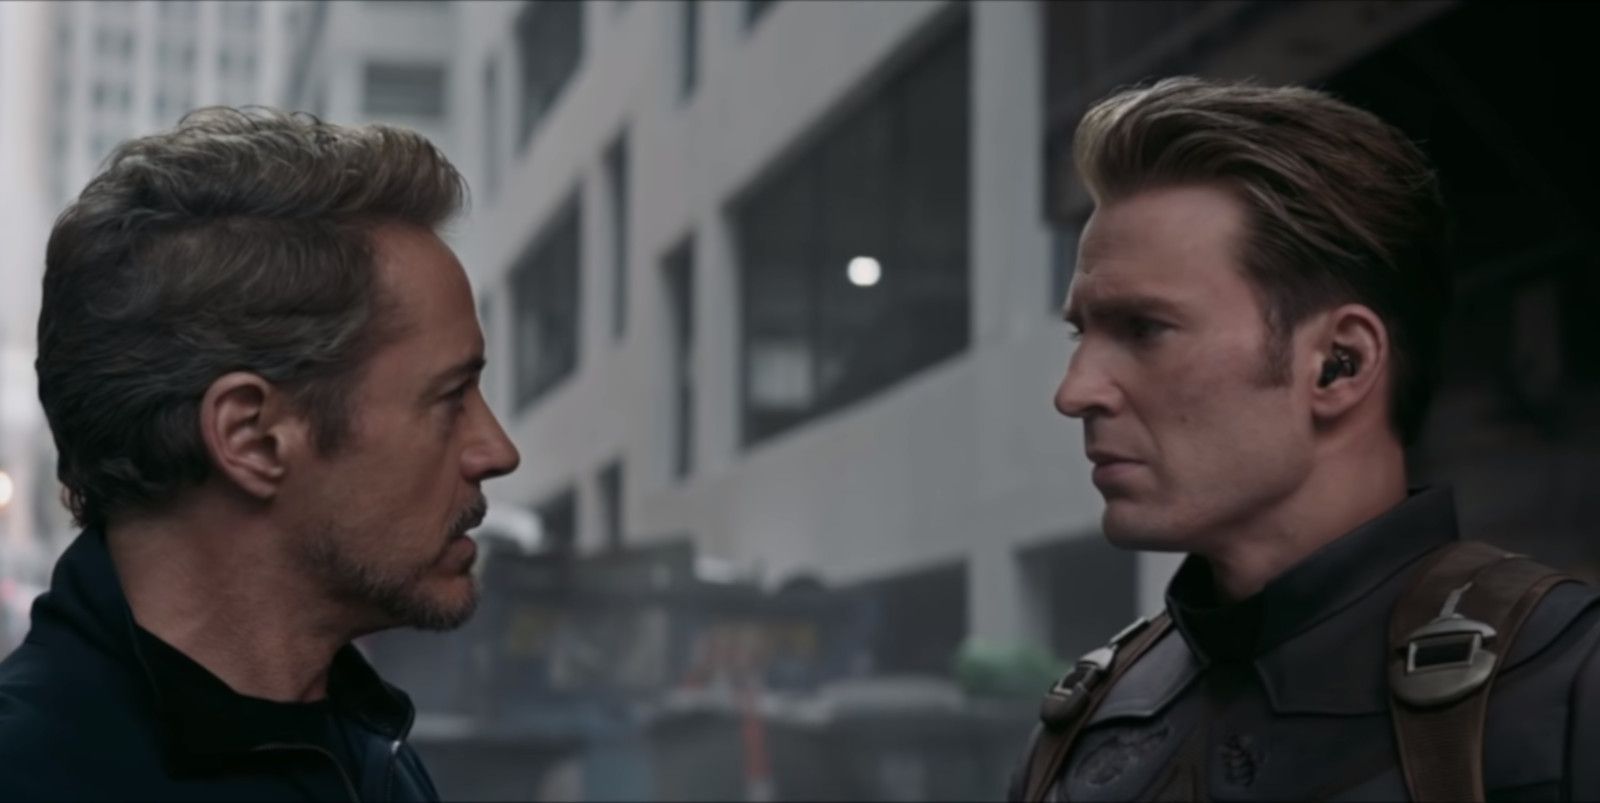 Tony and Steve go back in time together in Avengers: Endgame